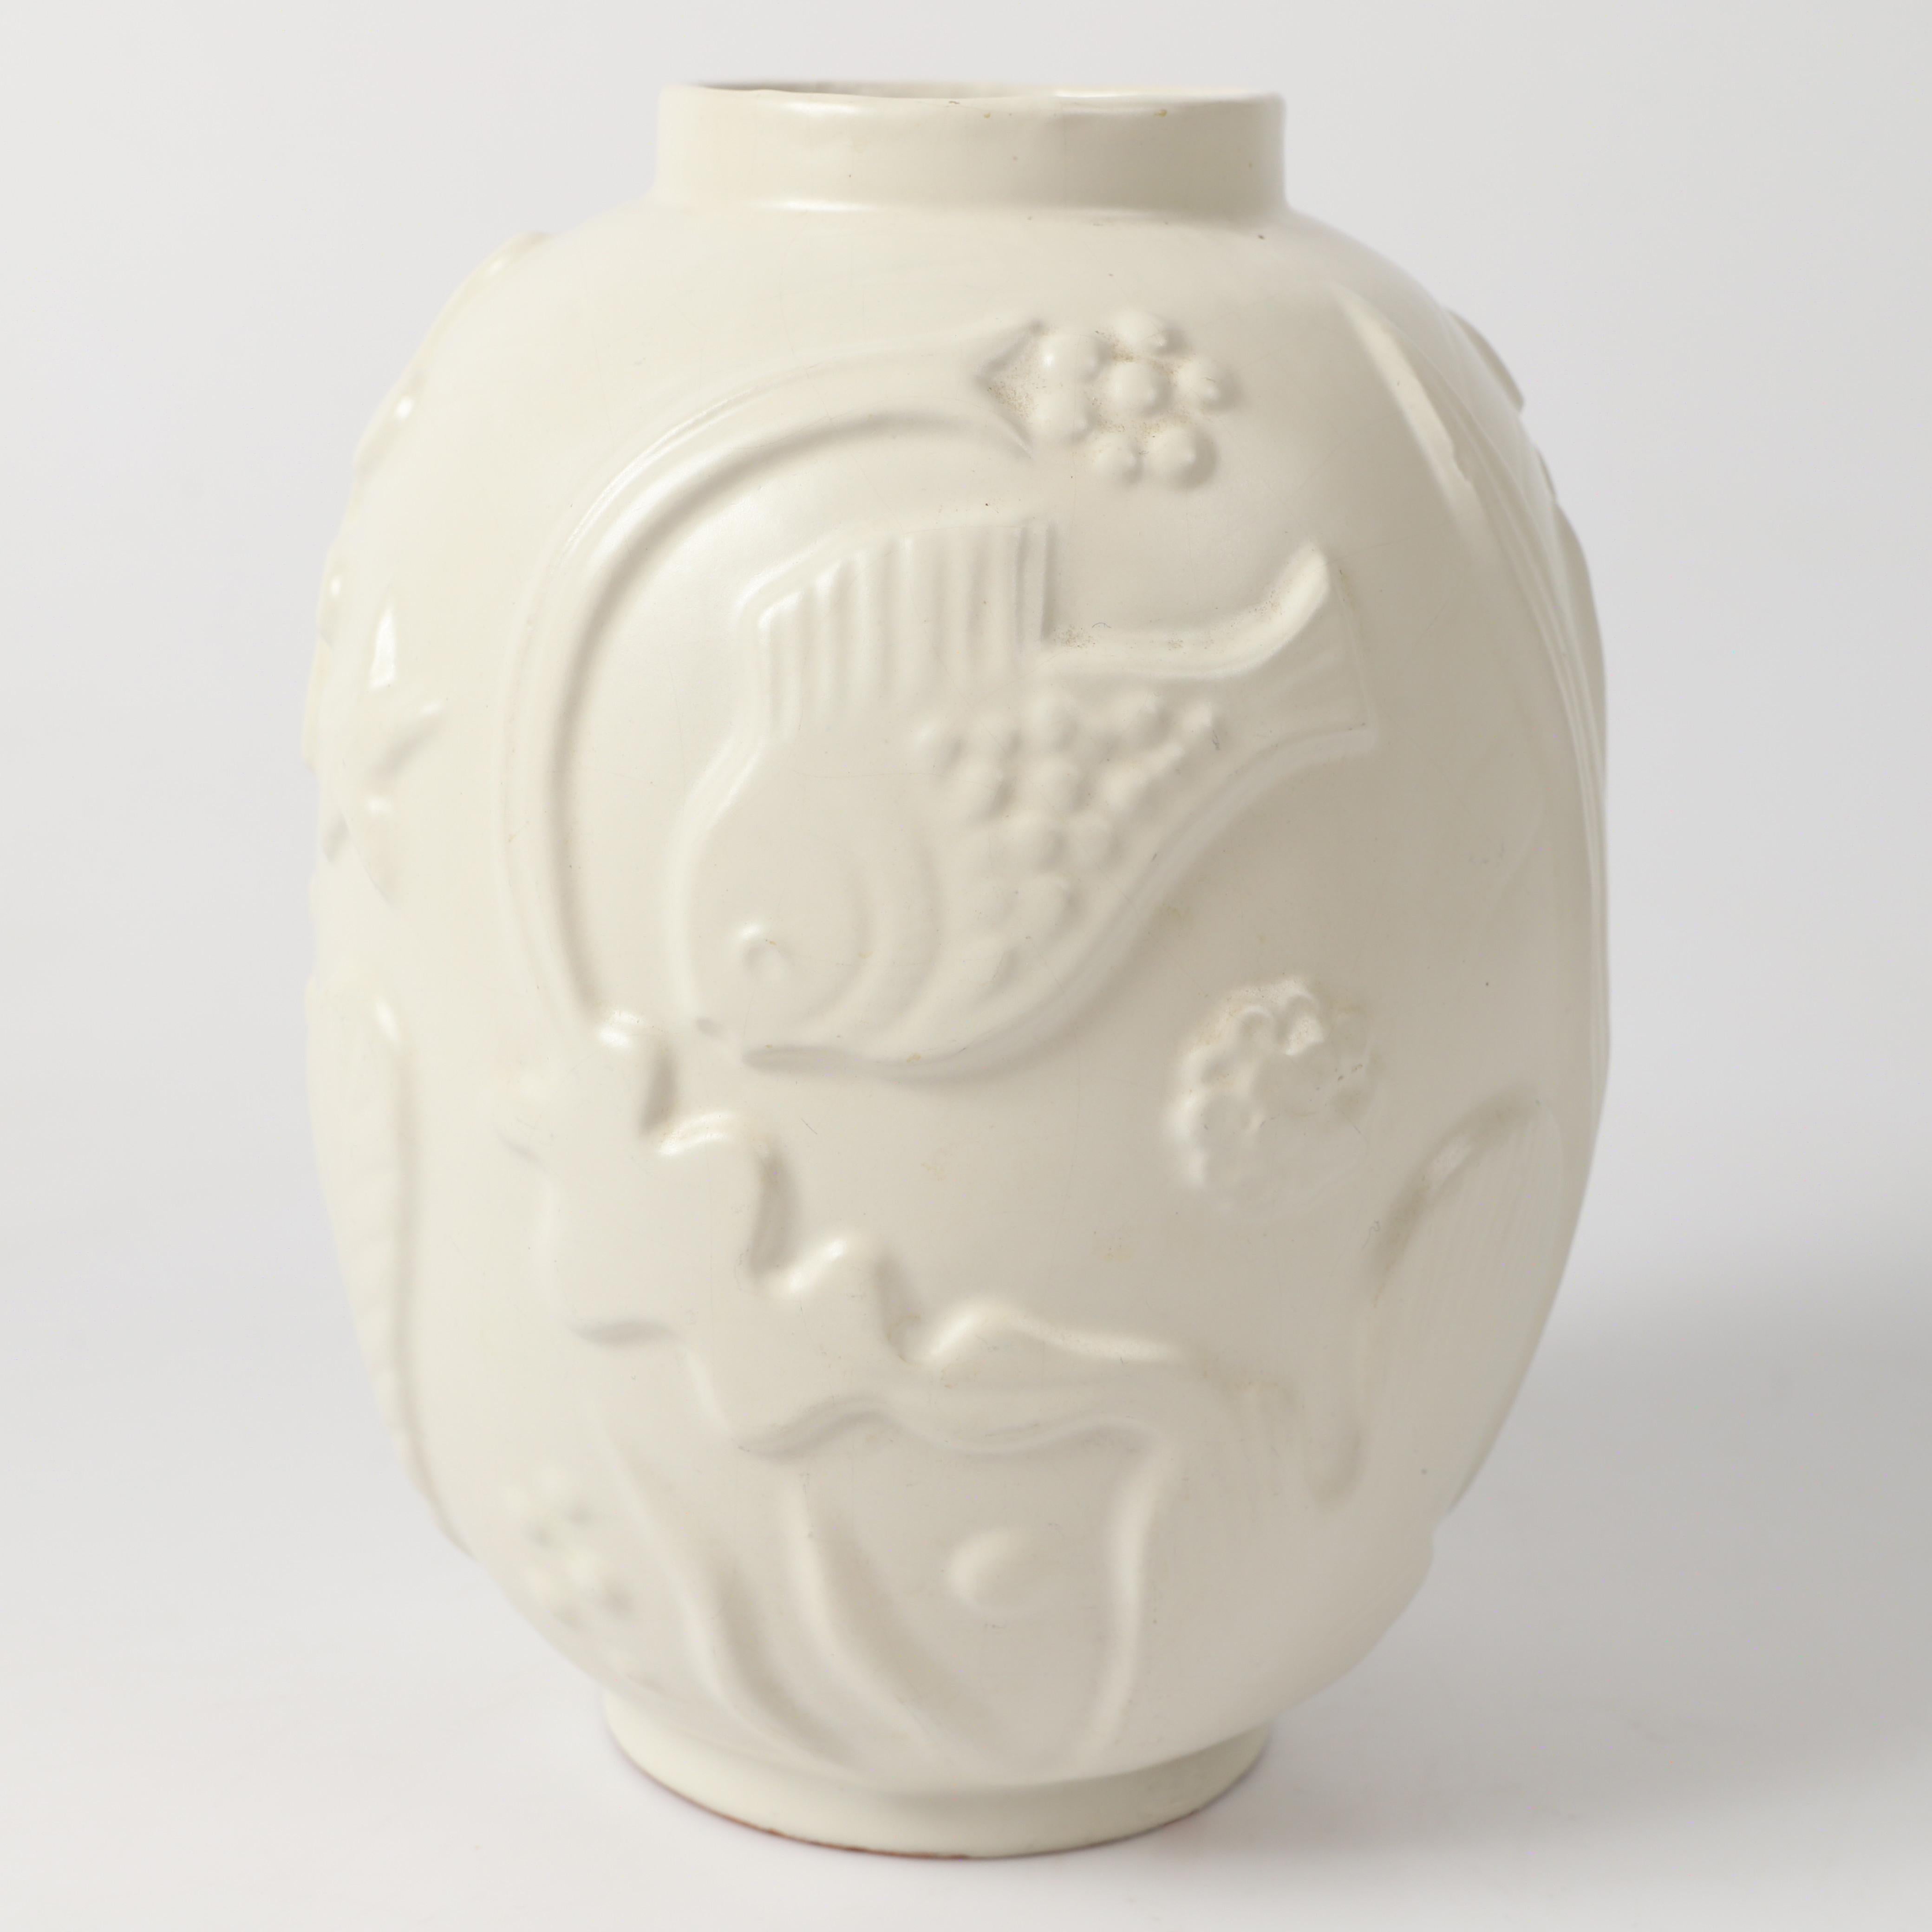 Earthenware vase, designed by Anna-Lisa Thomson for Upsala Ekeby in the 1930s. Exquisitely crafted, harmonious proportions accentuated by intricate underwater-themed relief decorations, all complemented by a gentle off-white glaze. This versatile